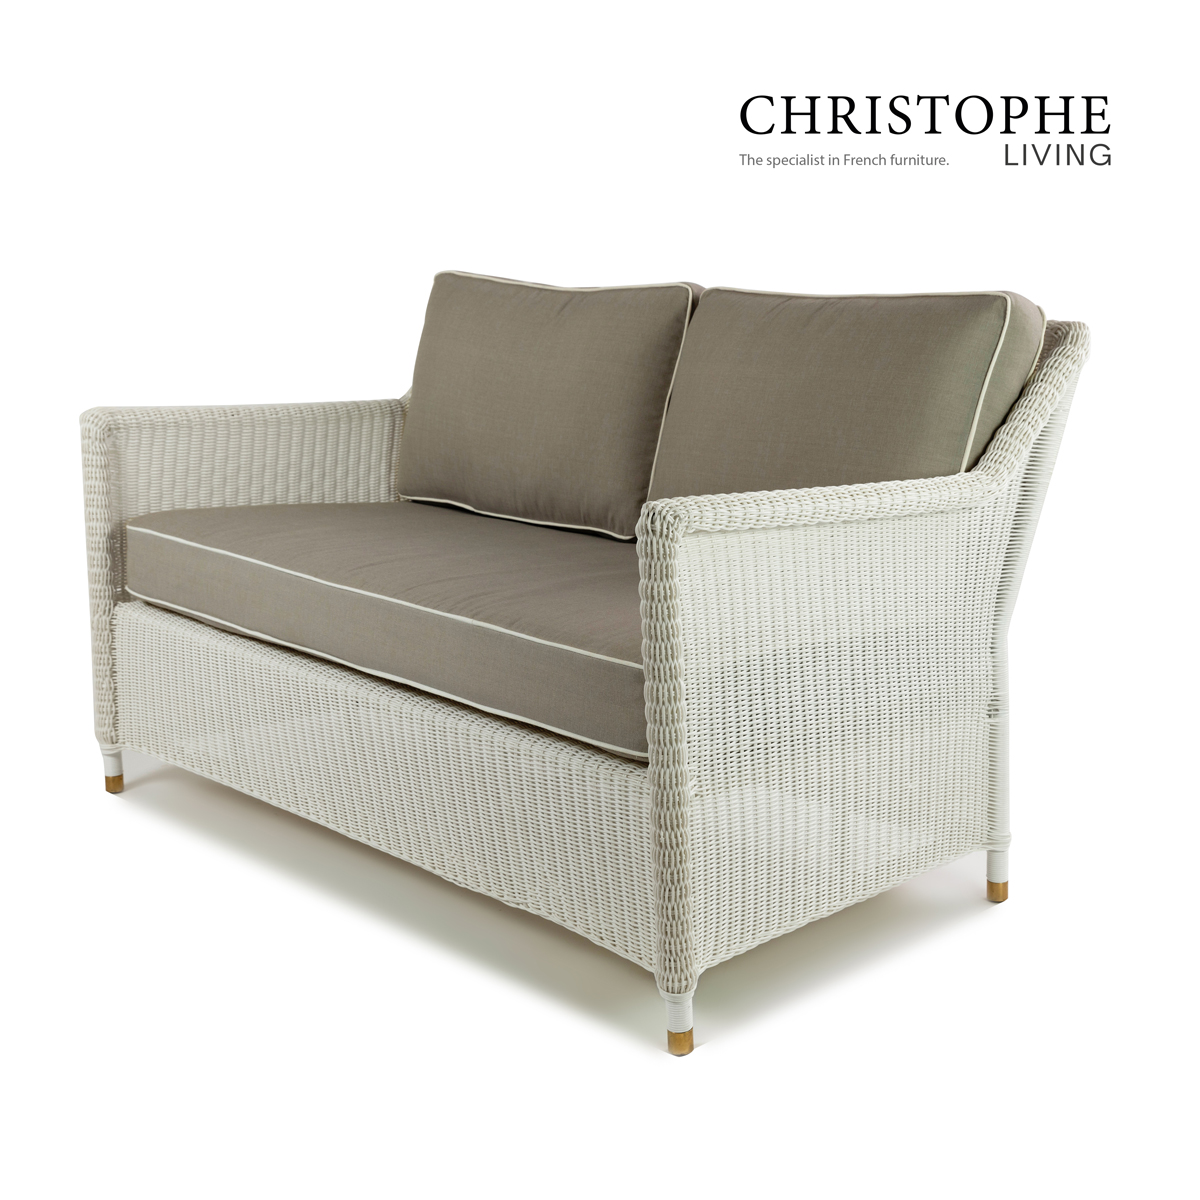 Hyams Classic Outdoor Wicker 2 Seater Sofa in White Synthetic Rattan